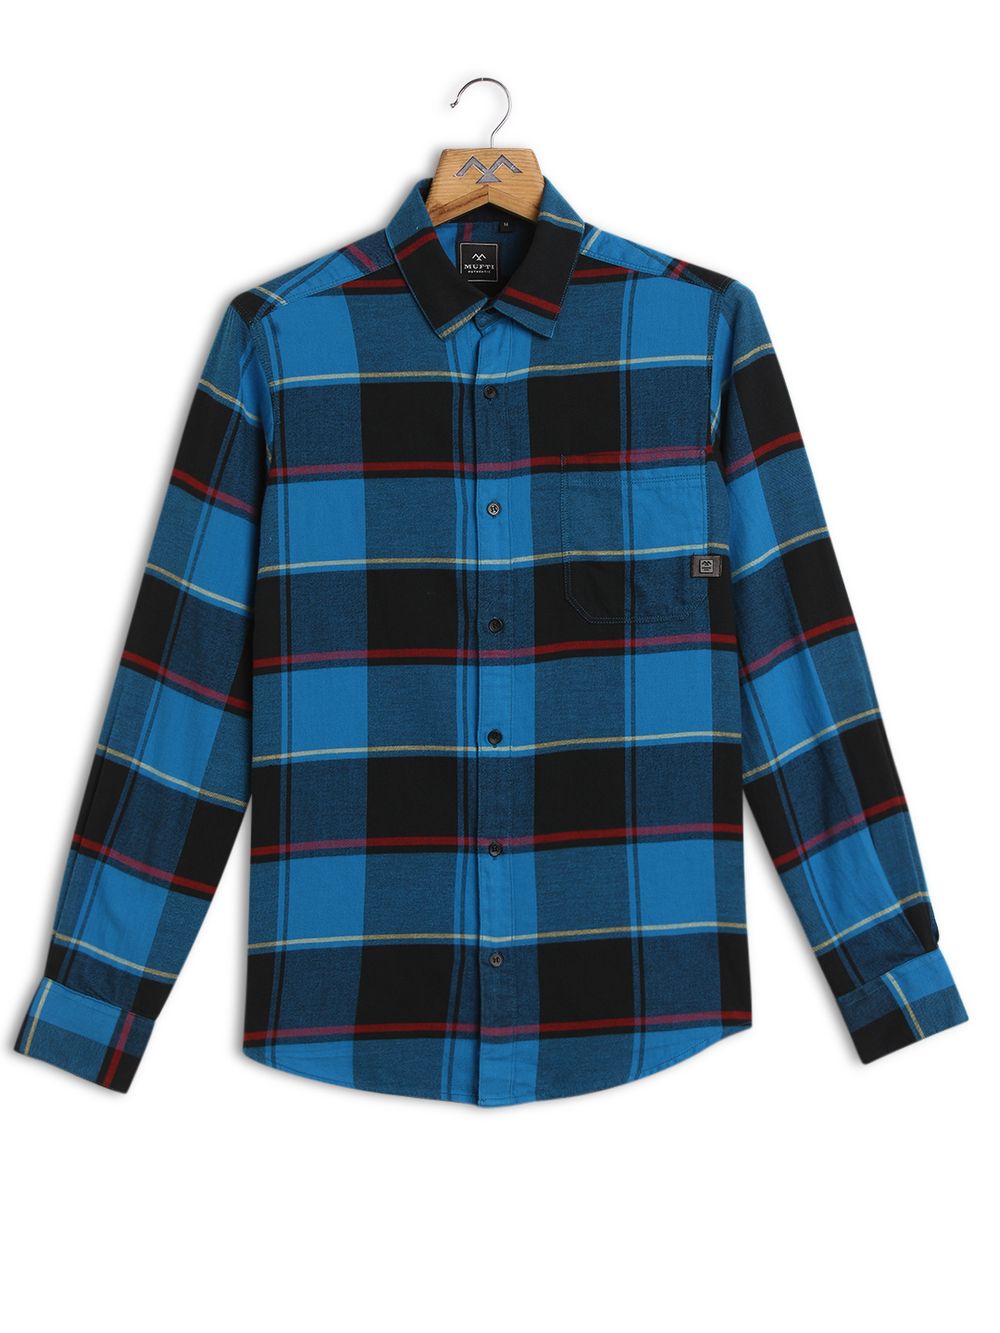 Turquoise & Black Large Check Slim Fit Casual Shirt